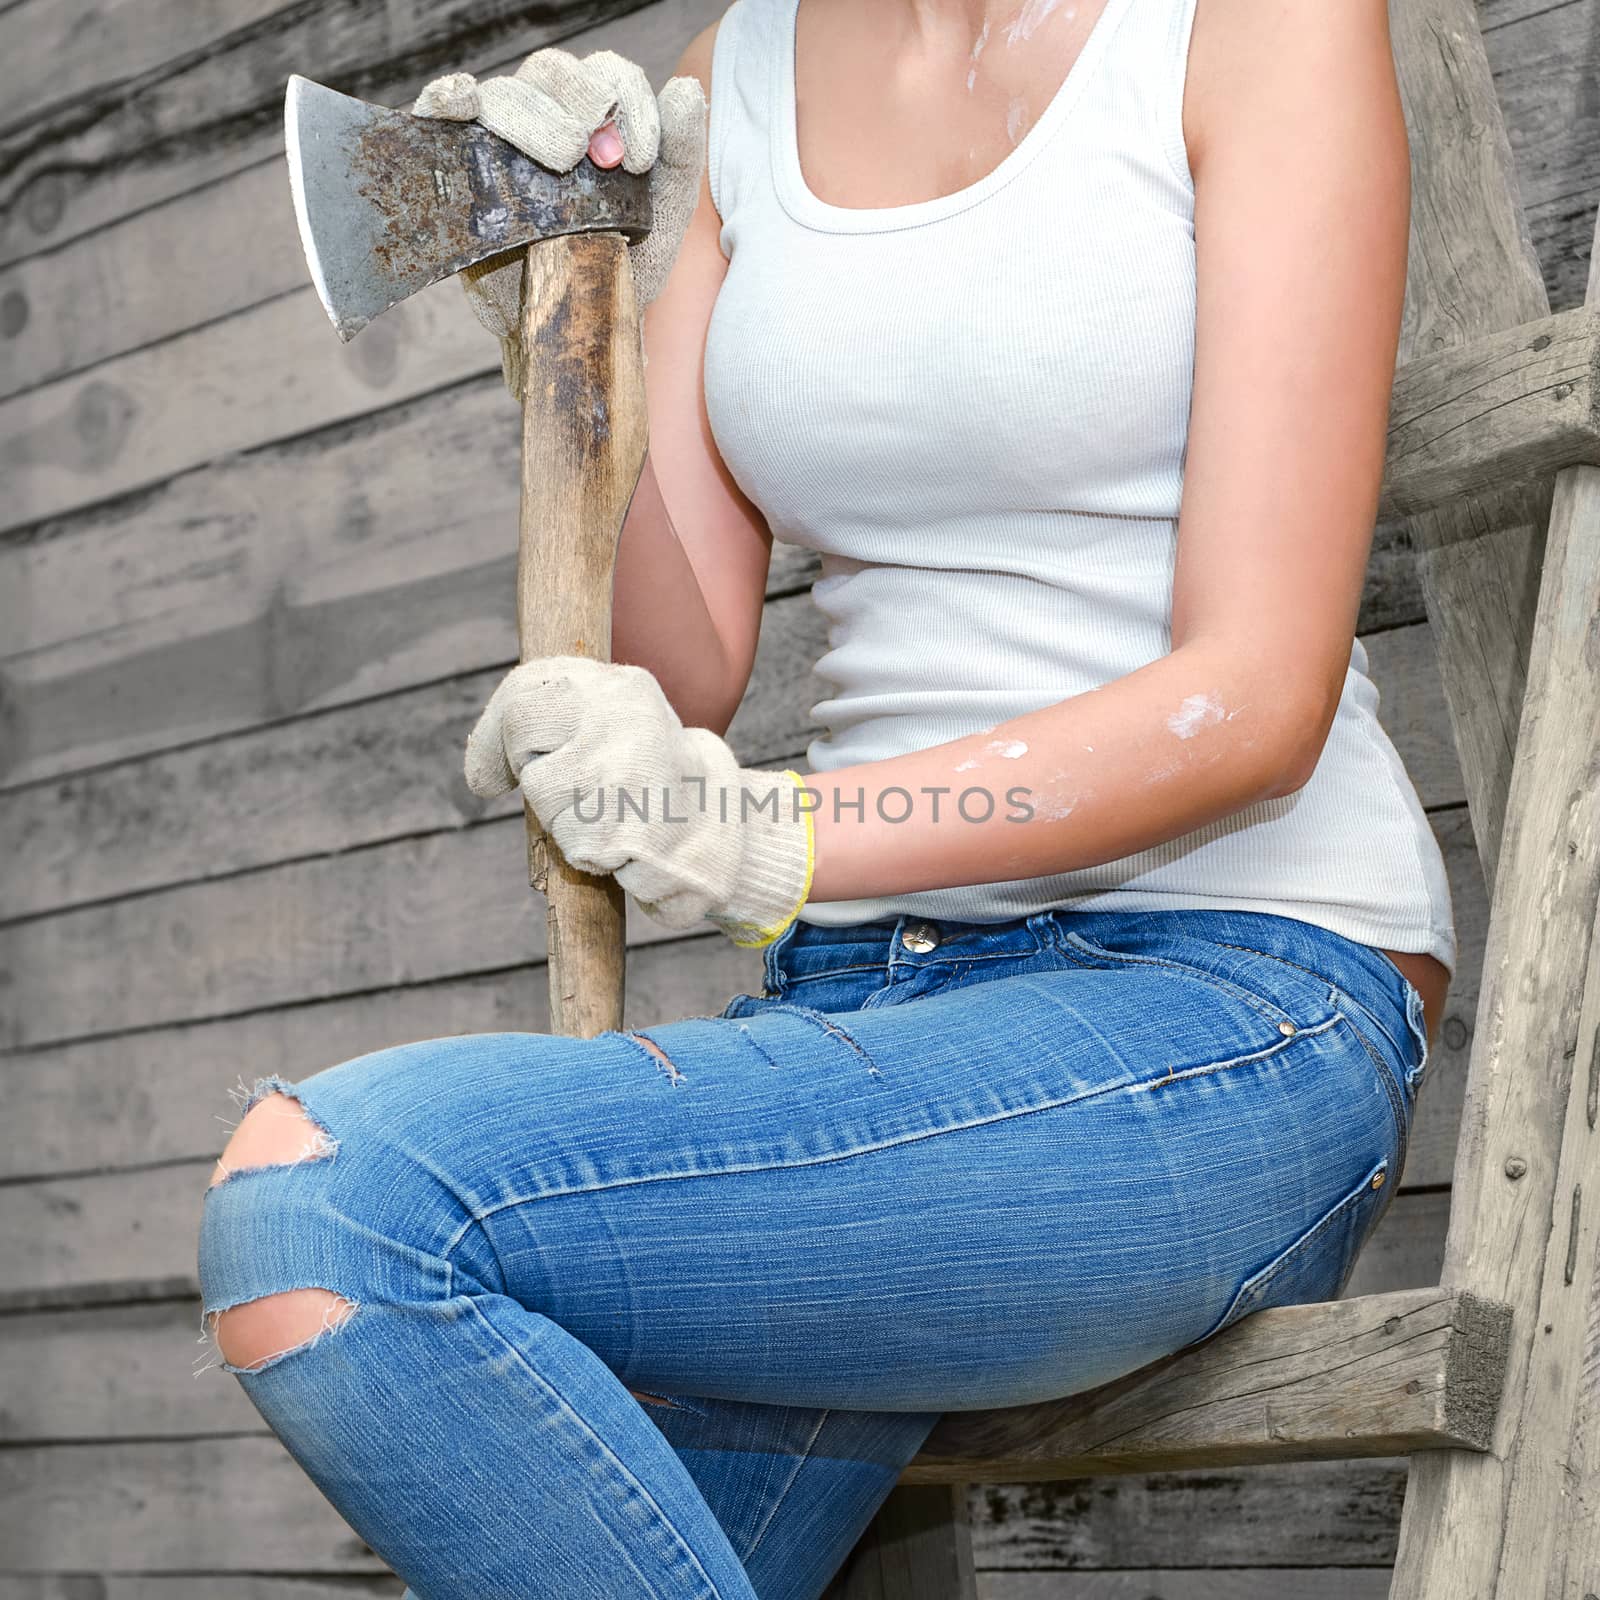 Girl sitting on an old ladder against the wall from the old boards. In old clothes and work gloves, holding an old axe.